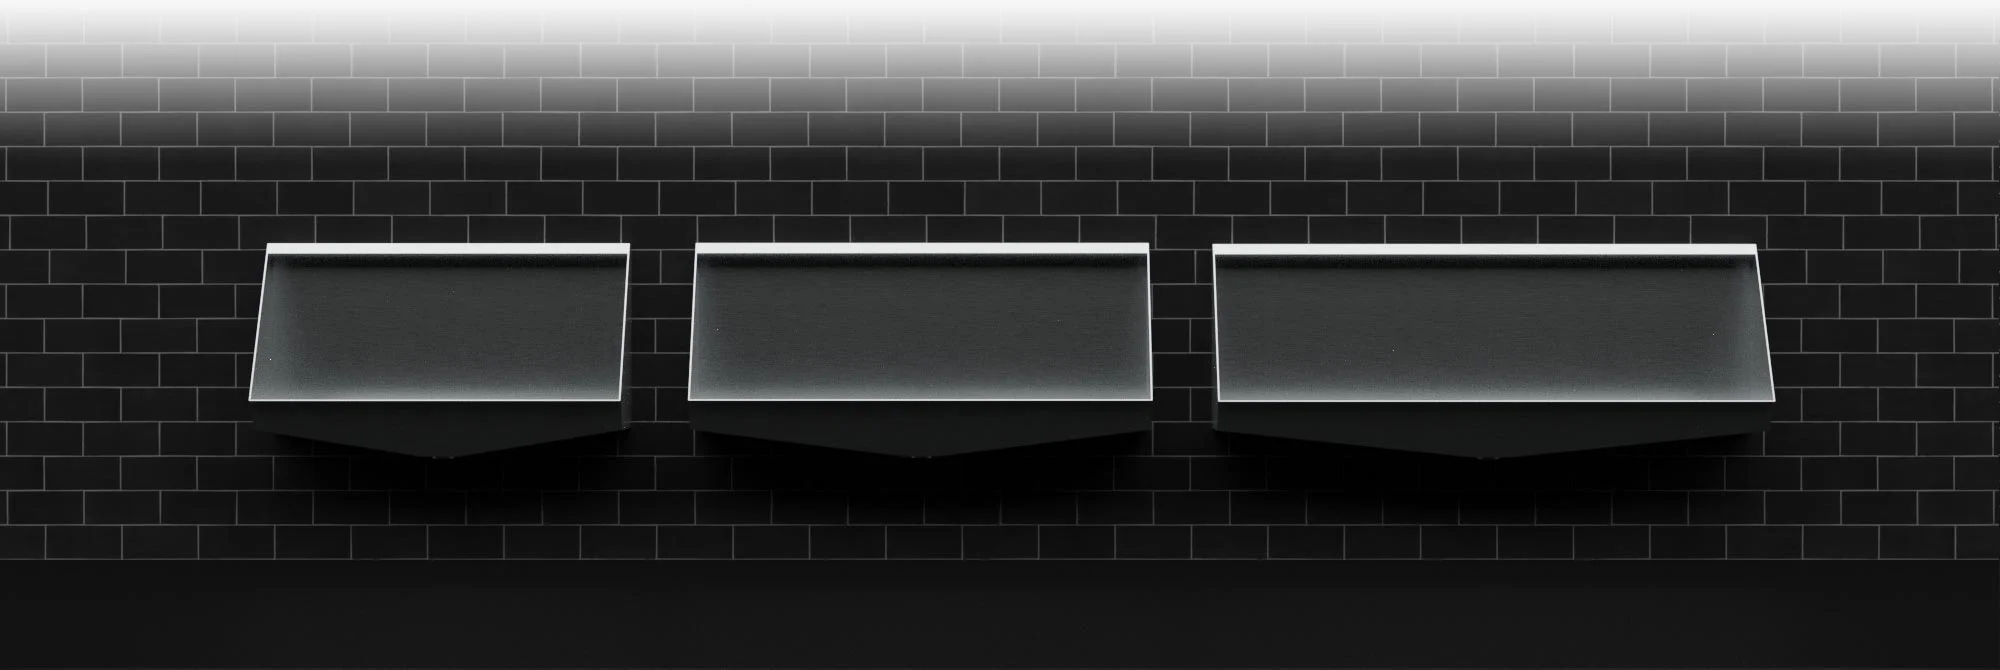 A selection of stainless steel urinal troughs in varying sizes fixed to dark coloured tiled wall in a washroom